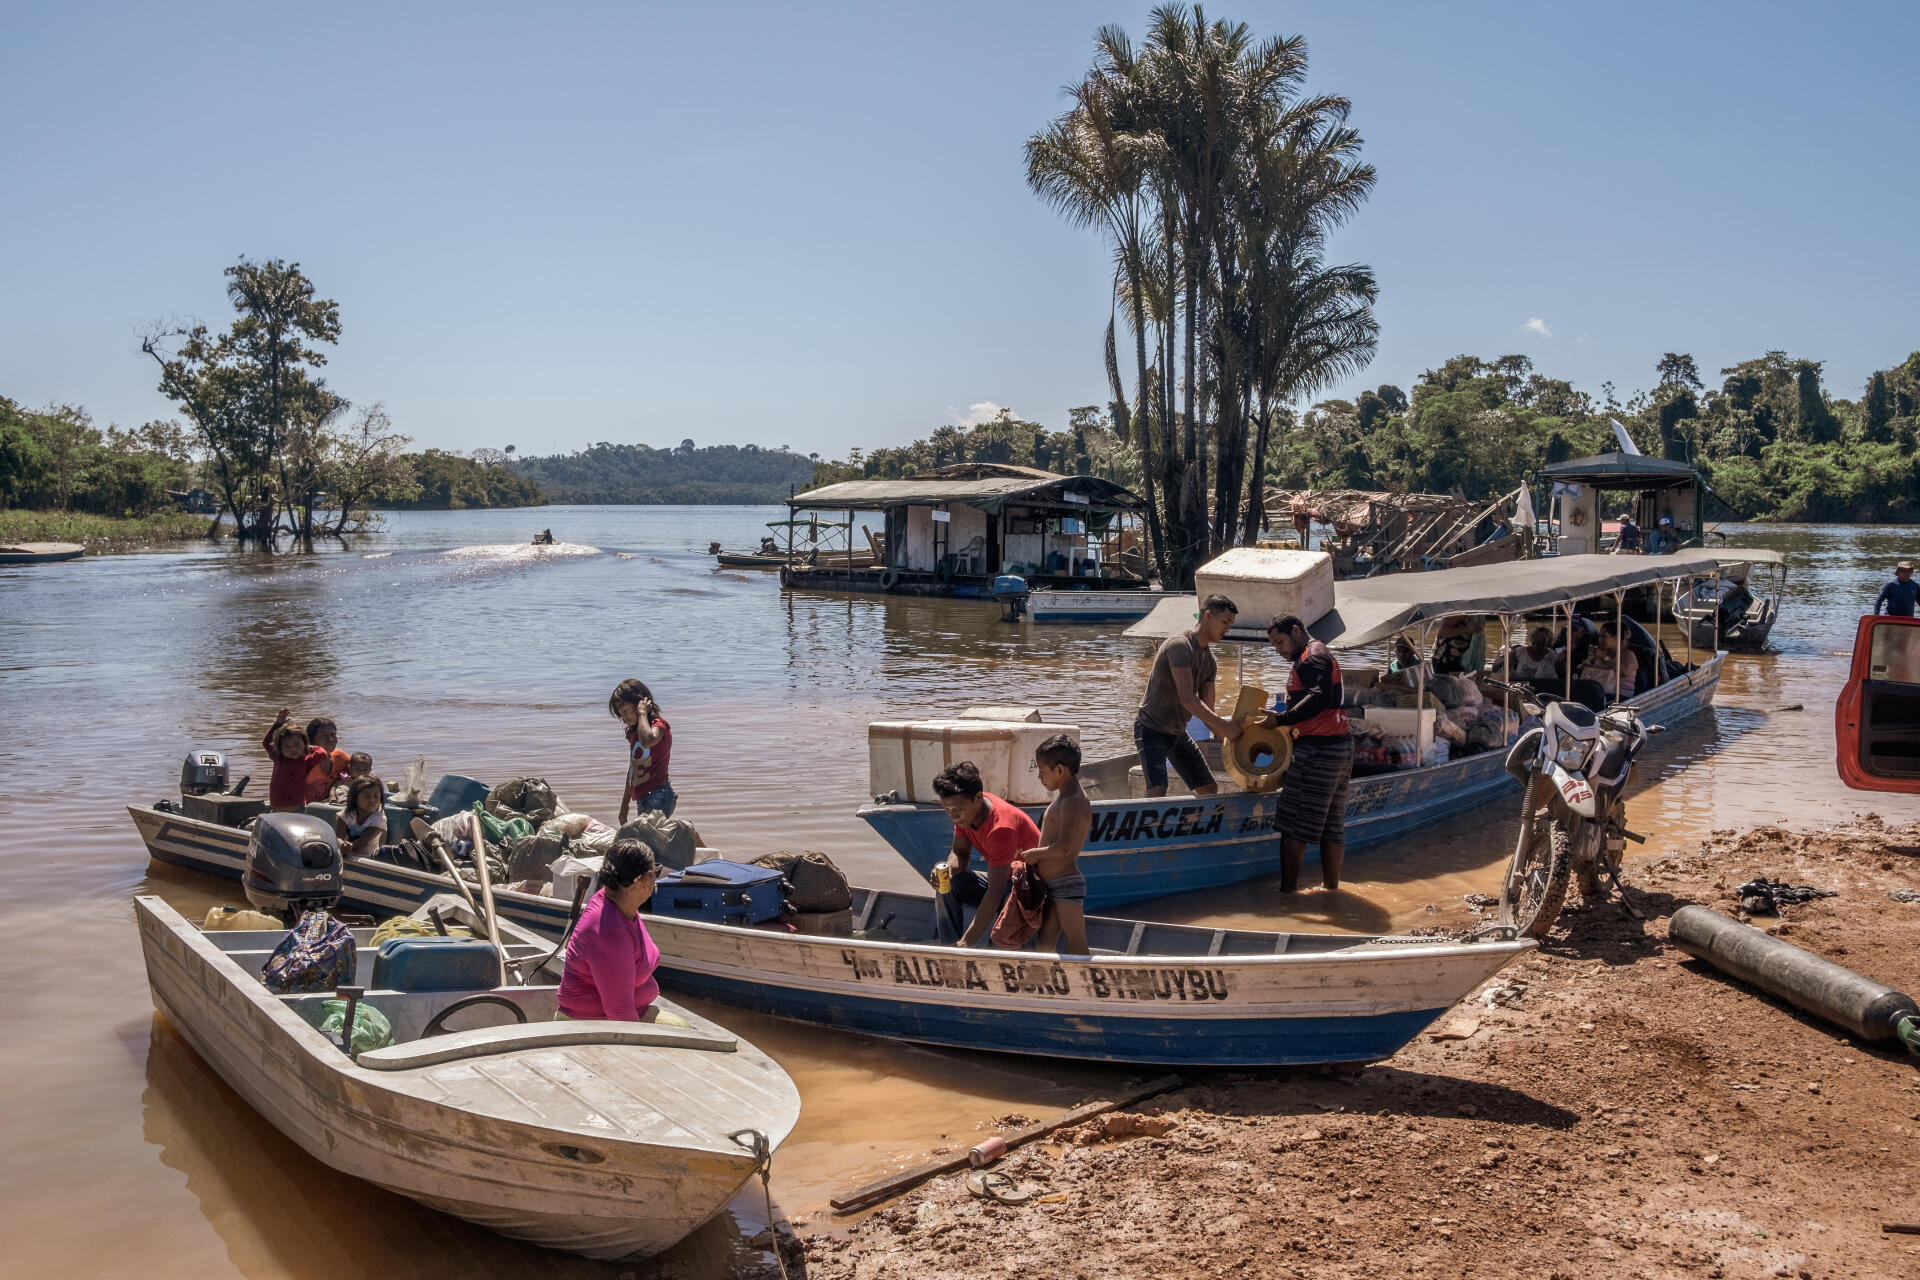 The port of Jacareacanga, in the state of Para, Brazil, on May 26, 2022. The entire economy of the city revolves around the illegal extraction of gold.